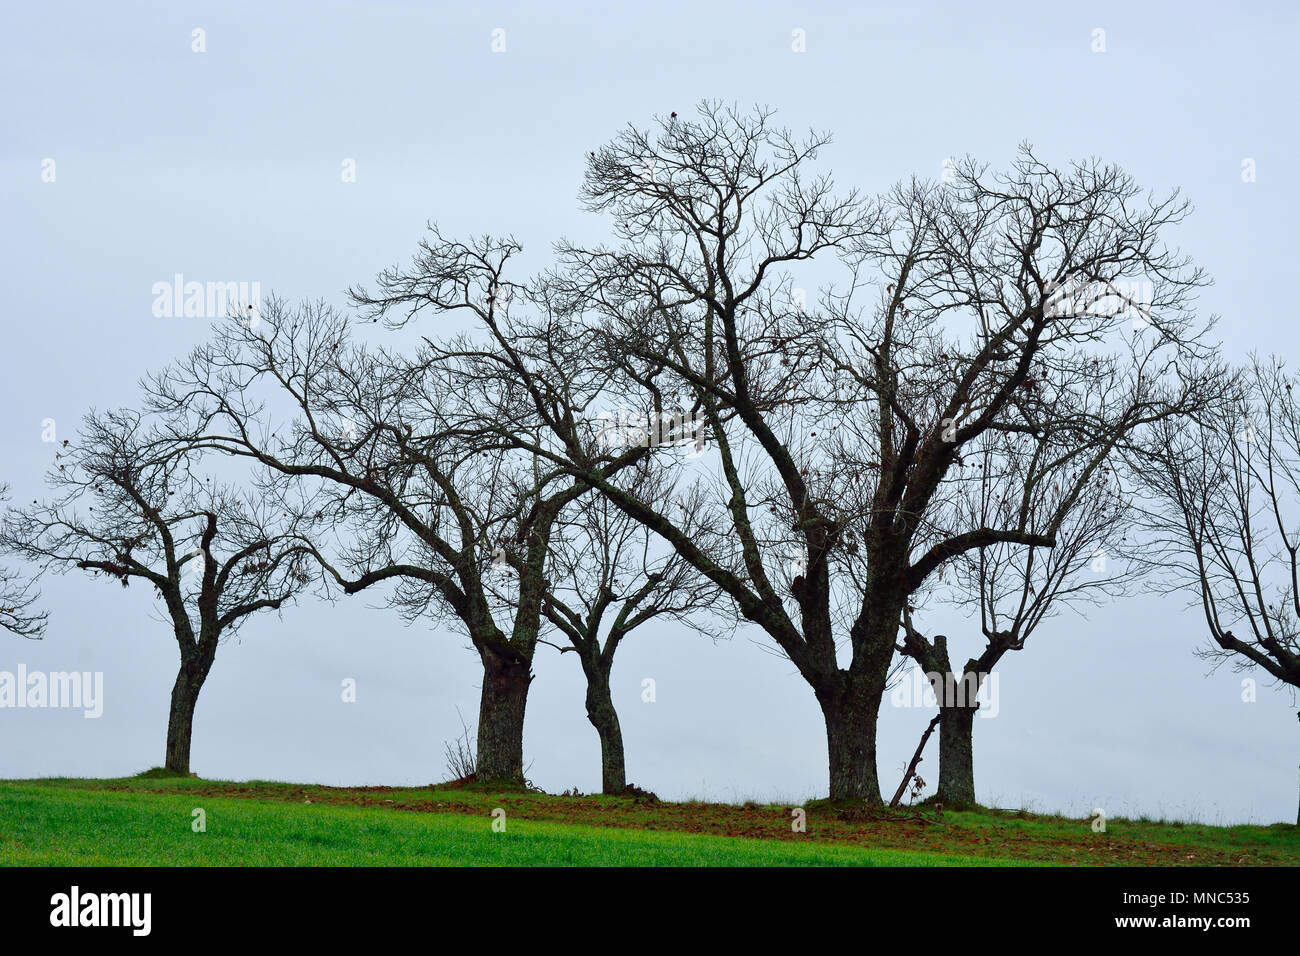 Chestnut trees in Winter. Montesinho Nature Park, Tras-os-Montes. Portugal Stock Photo